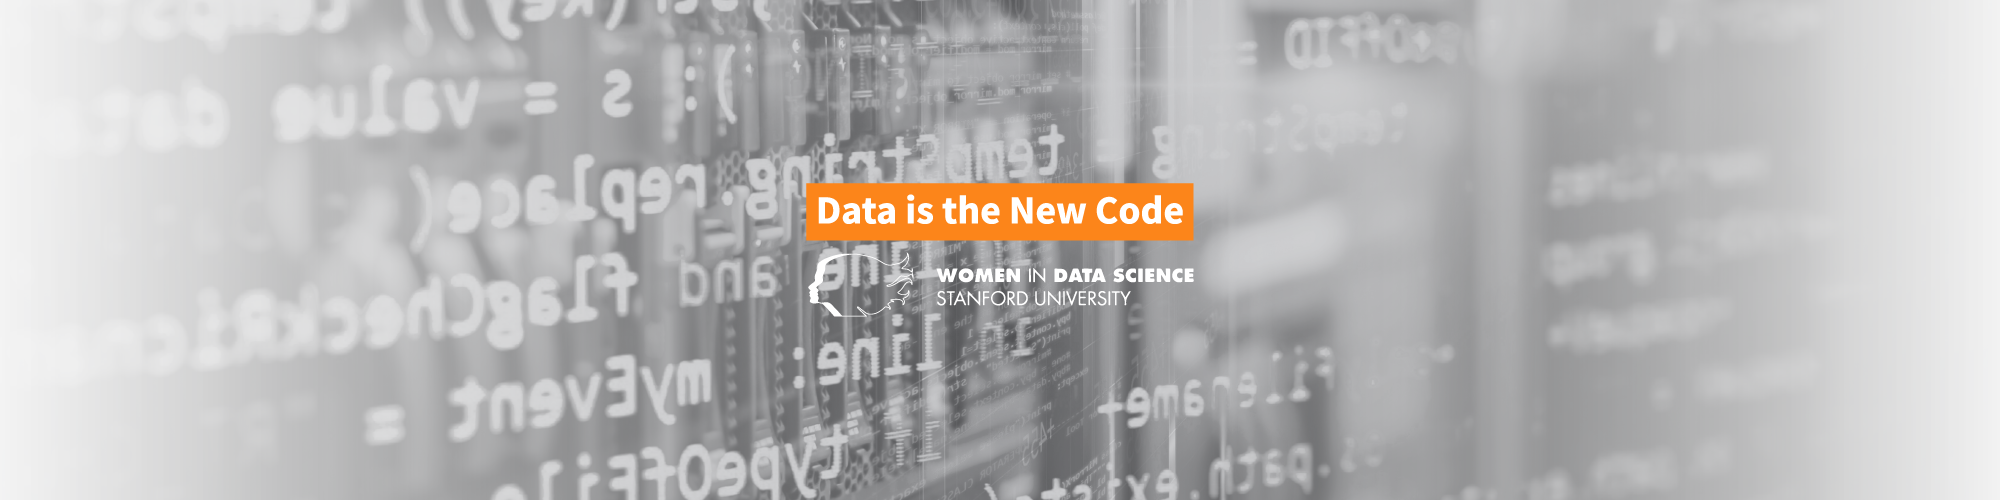 WiDS 2021: Data is the New Code